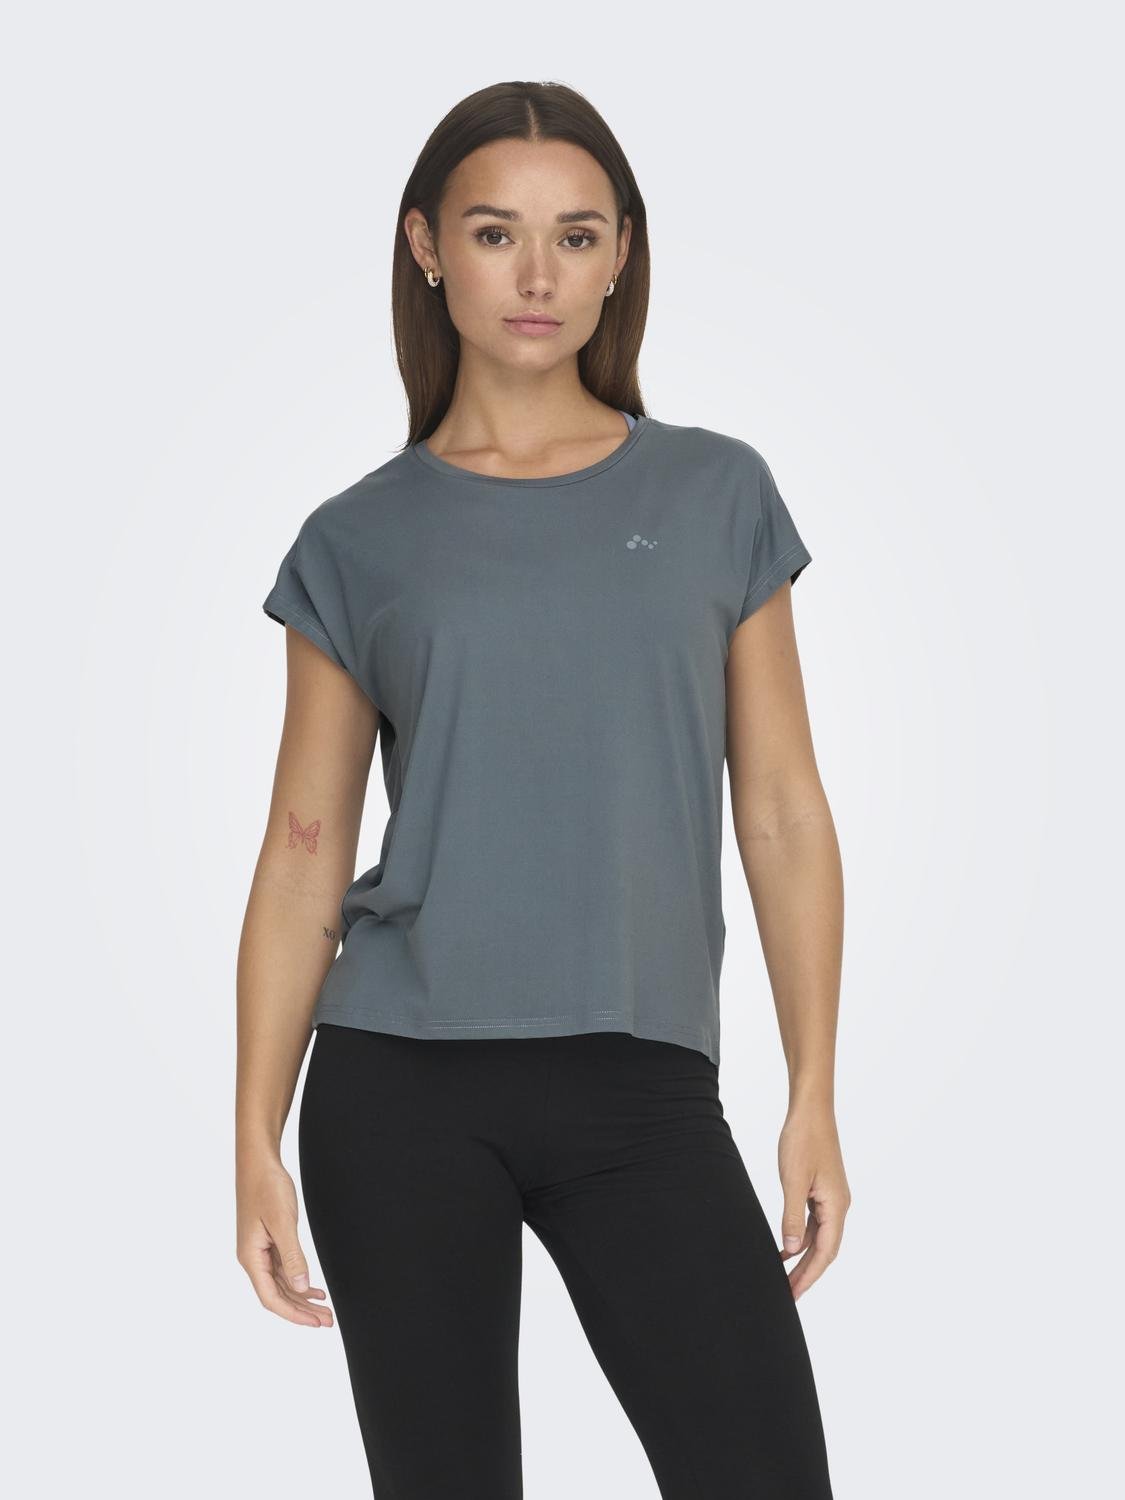 ONLY Loose fit Sporttopp -Stormy Weather - 15137012